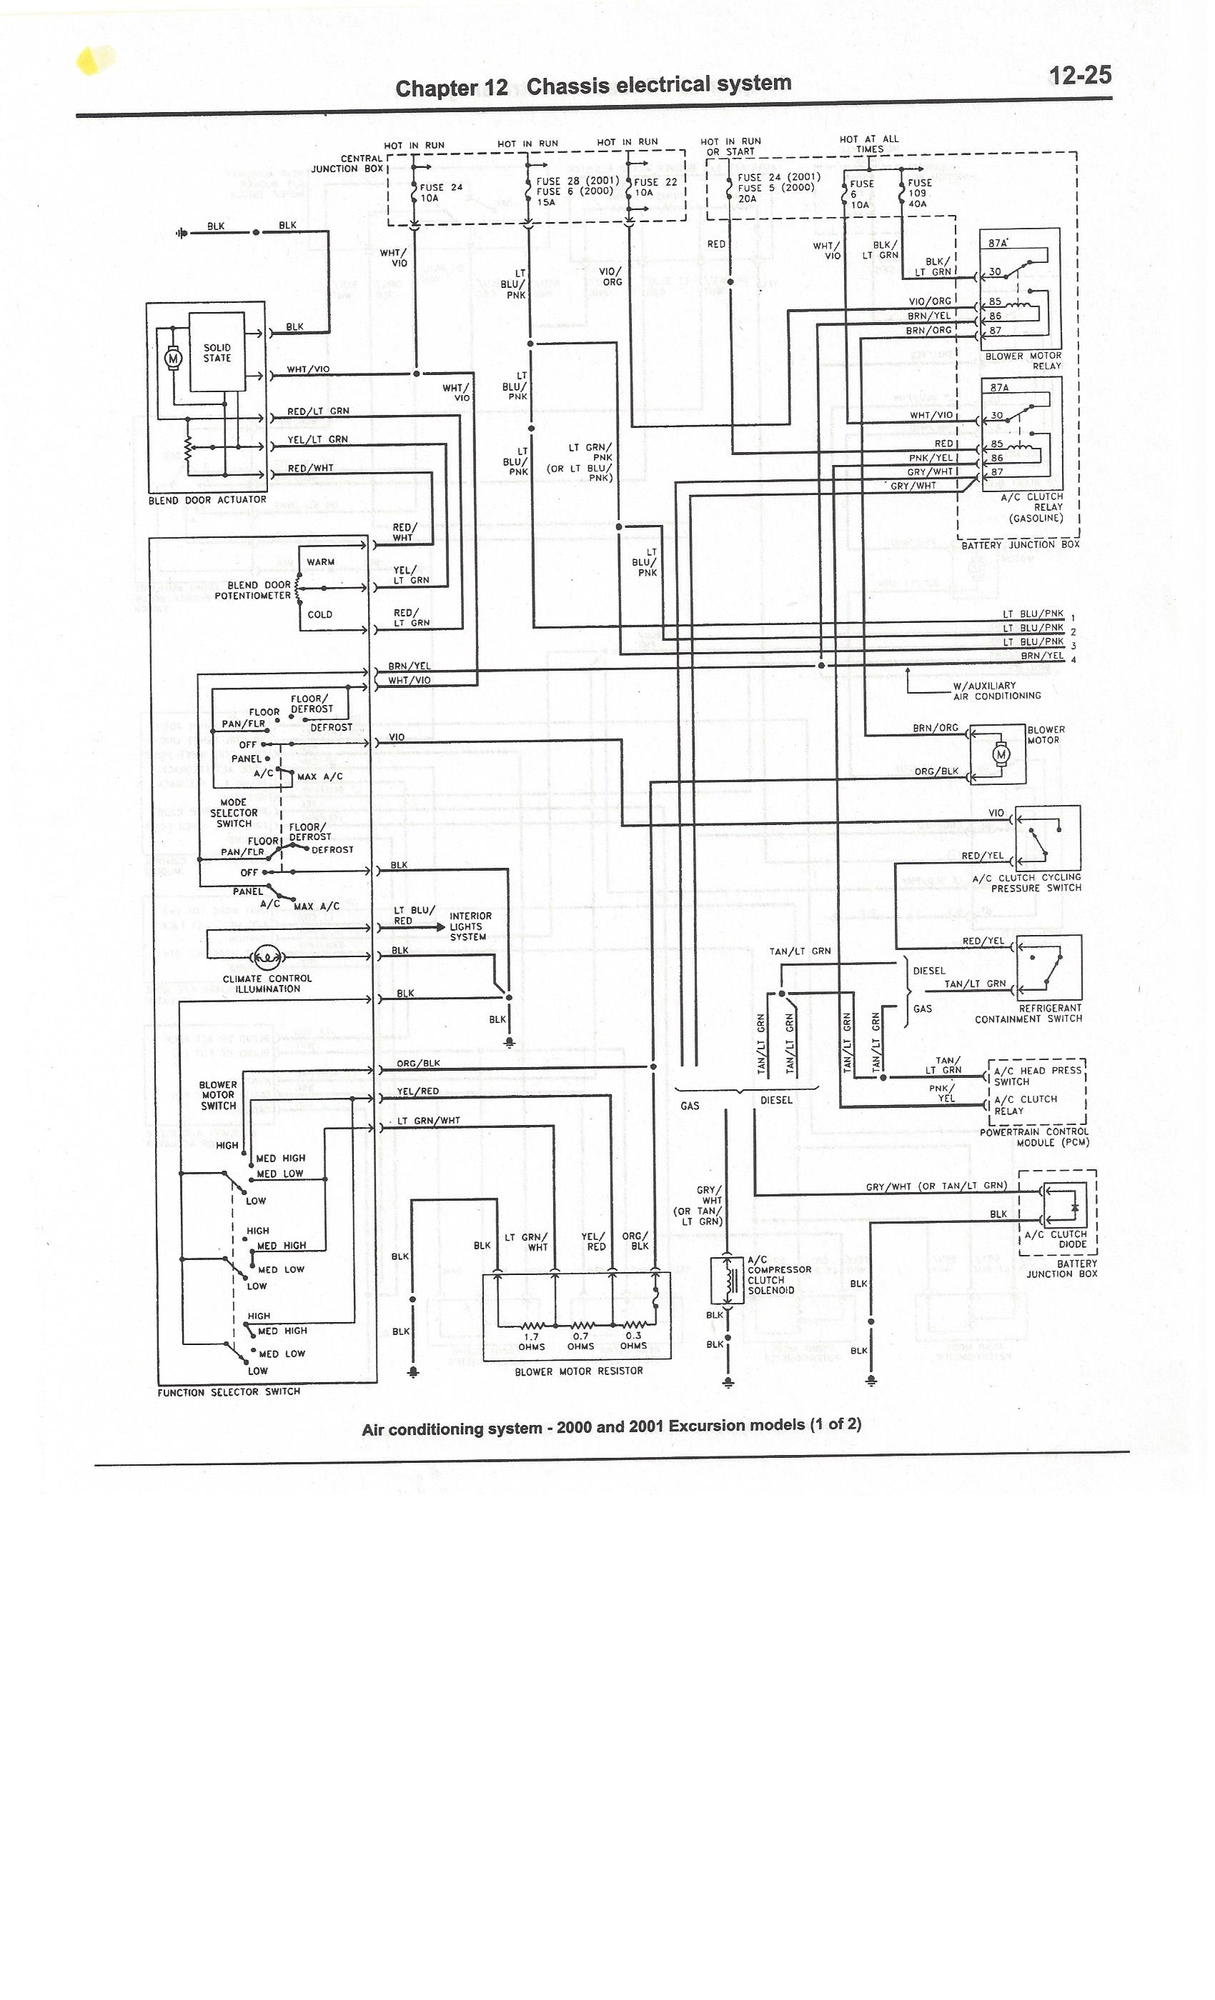 Complete Excursion Wiring Diagrams so far - Ford Truck Enthusiasts